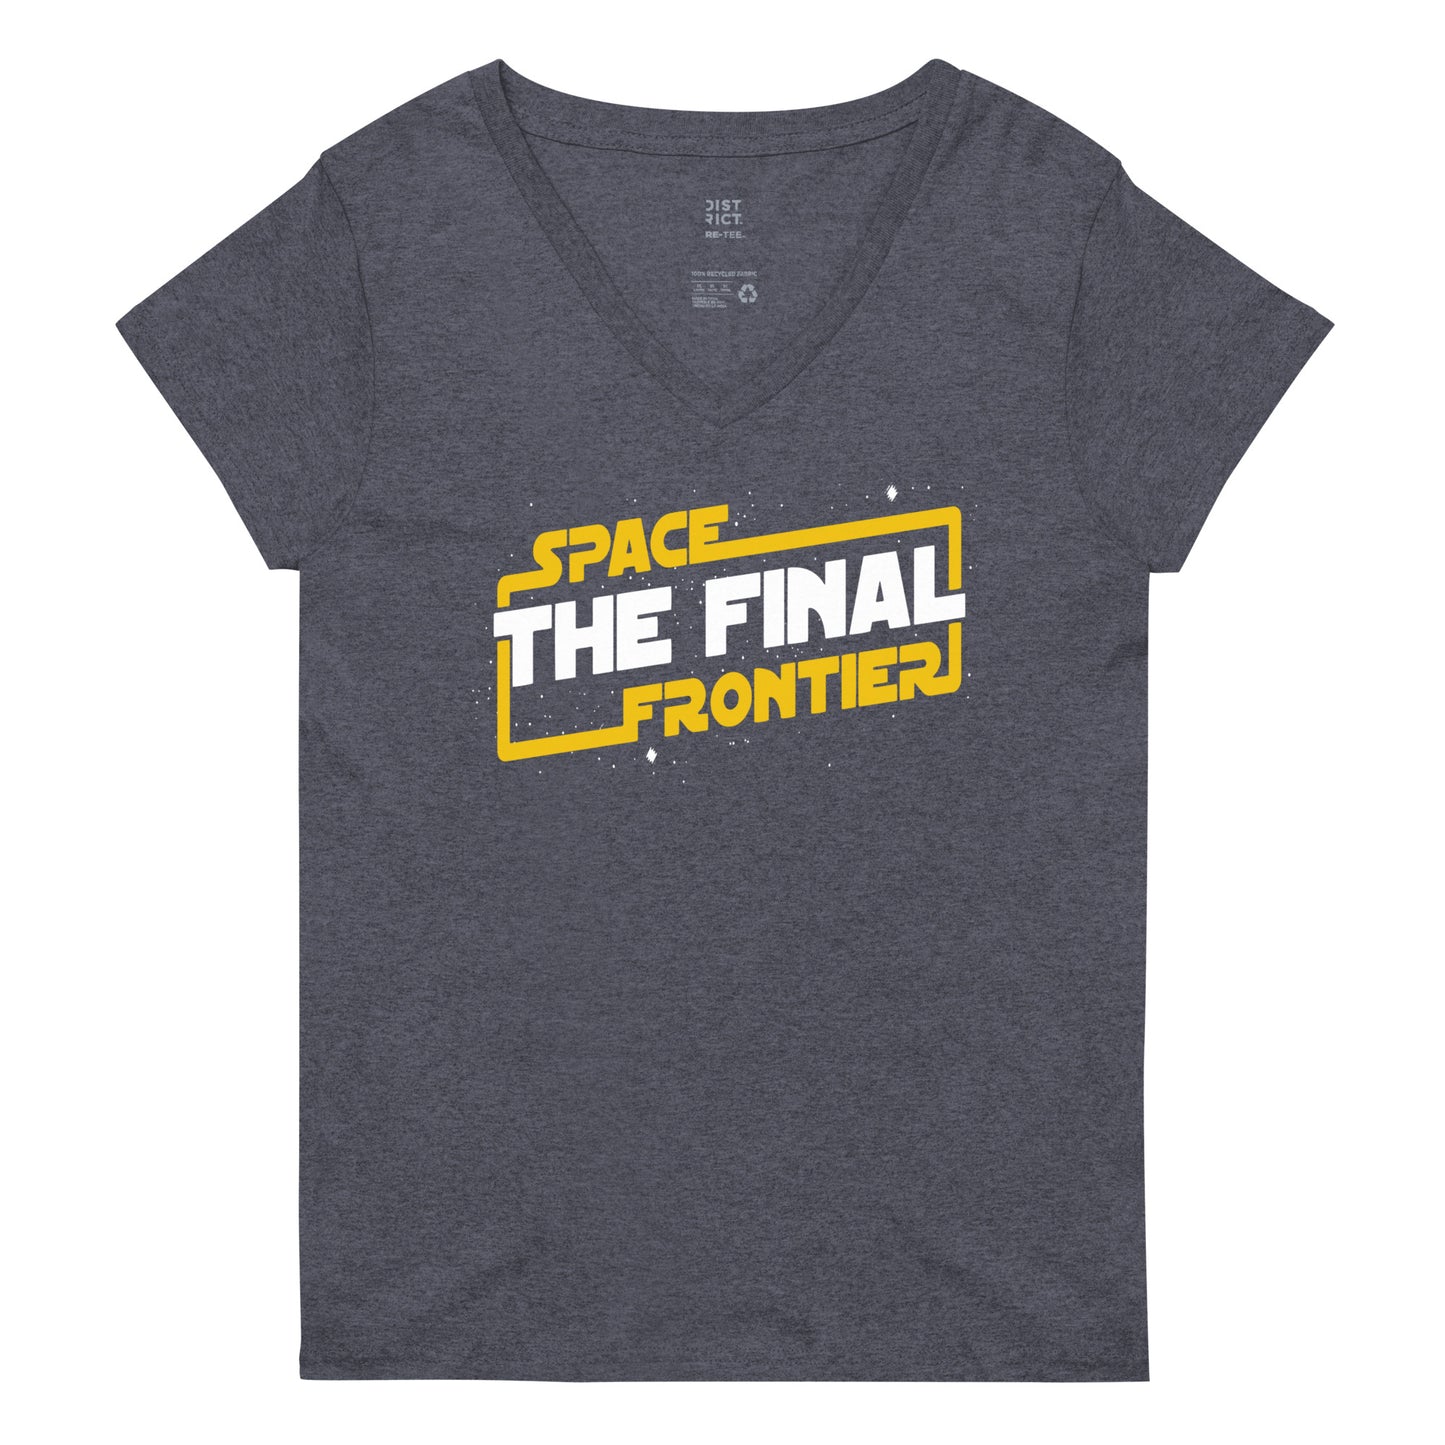 Space The Final Frontier Women's V-Neck Tee